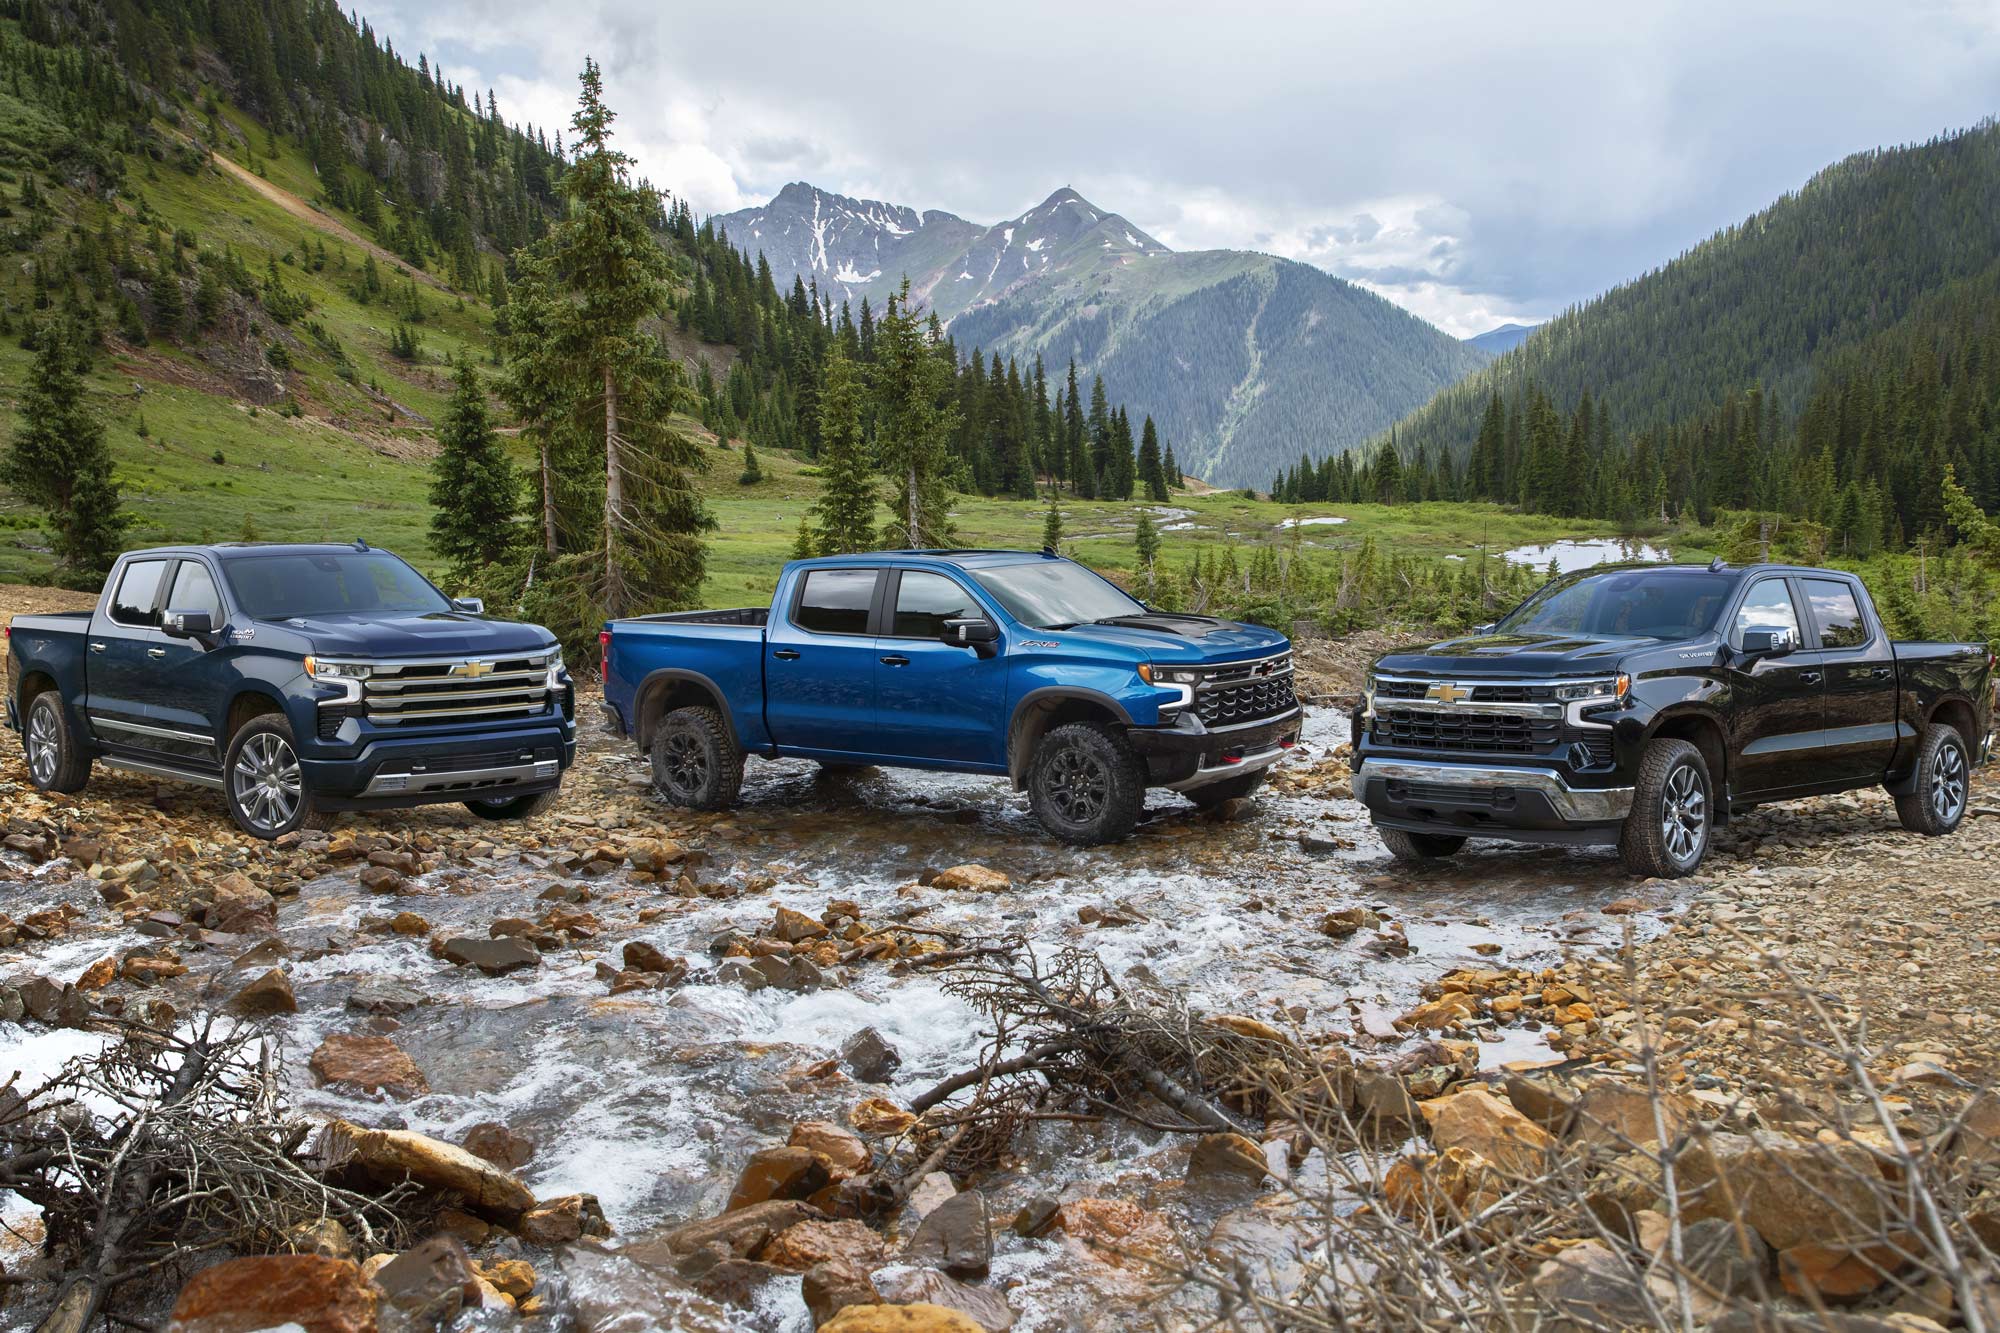 Three 2023 Chevrolet Silverado 1500s sit in and near a small creek in the wilderness.